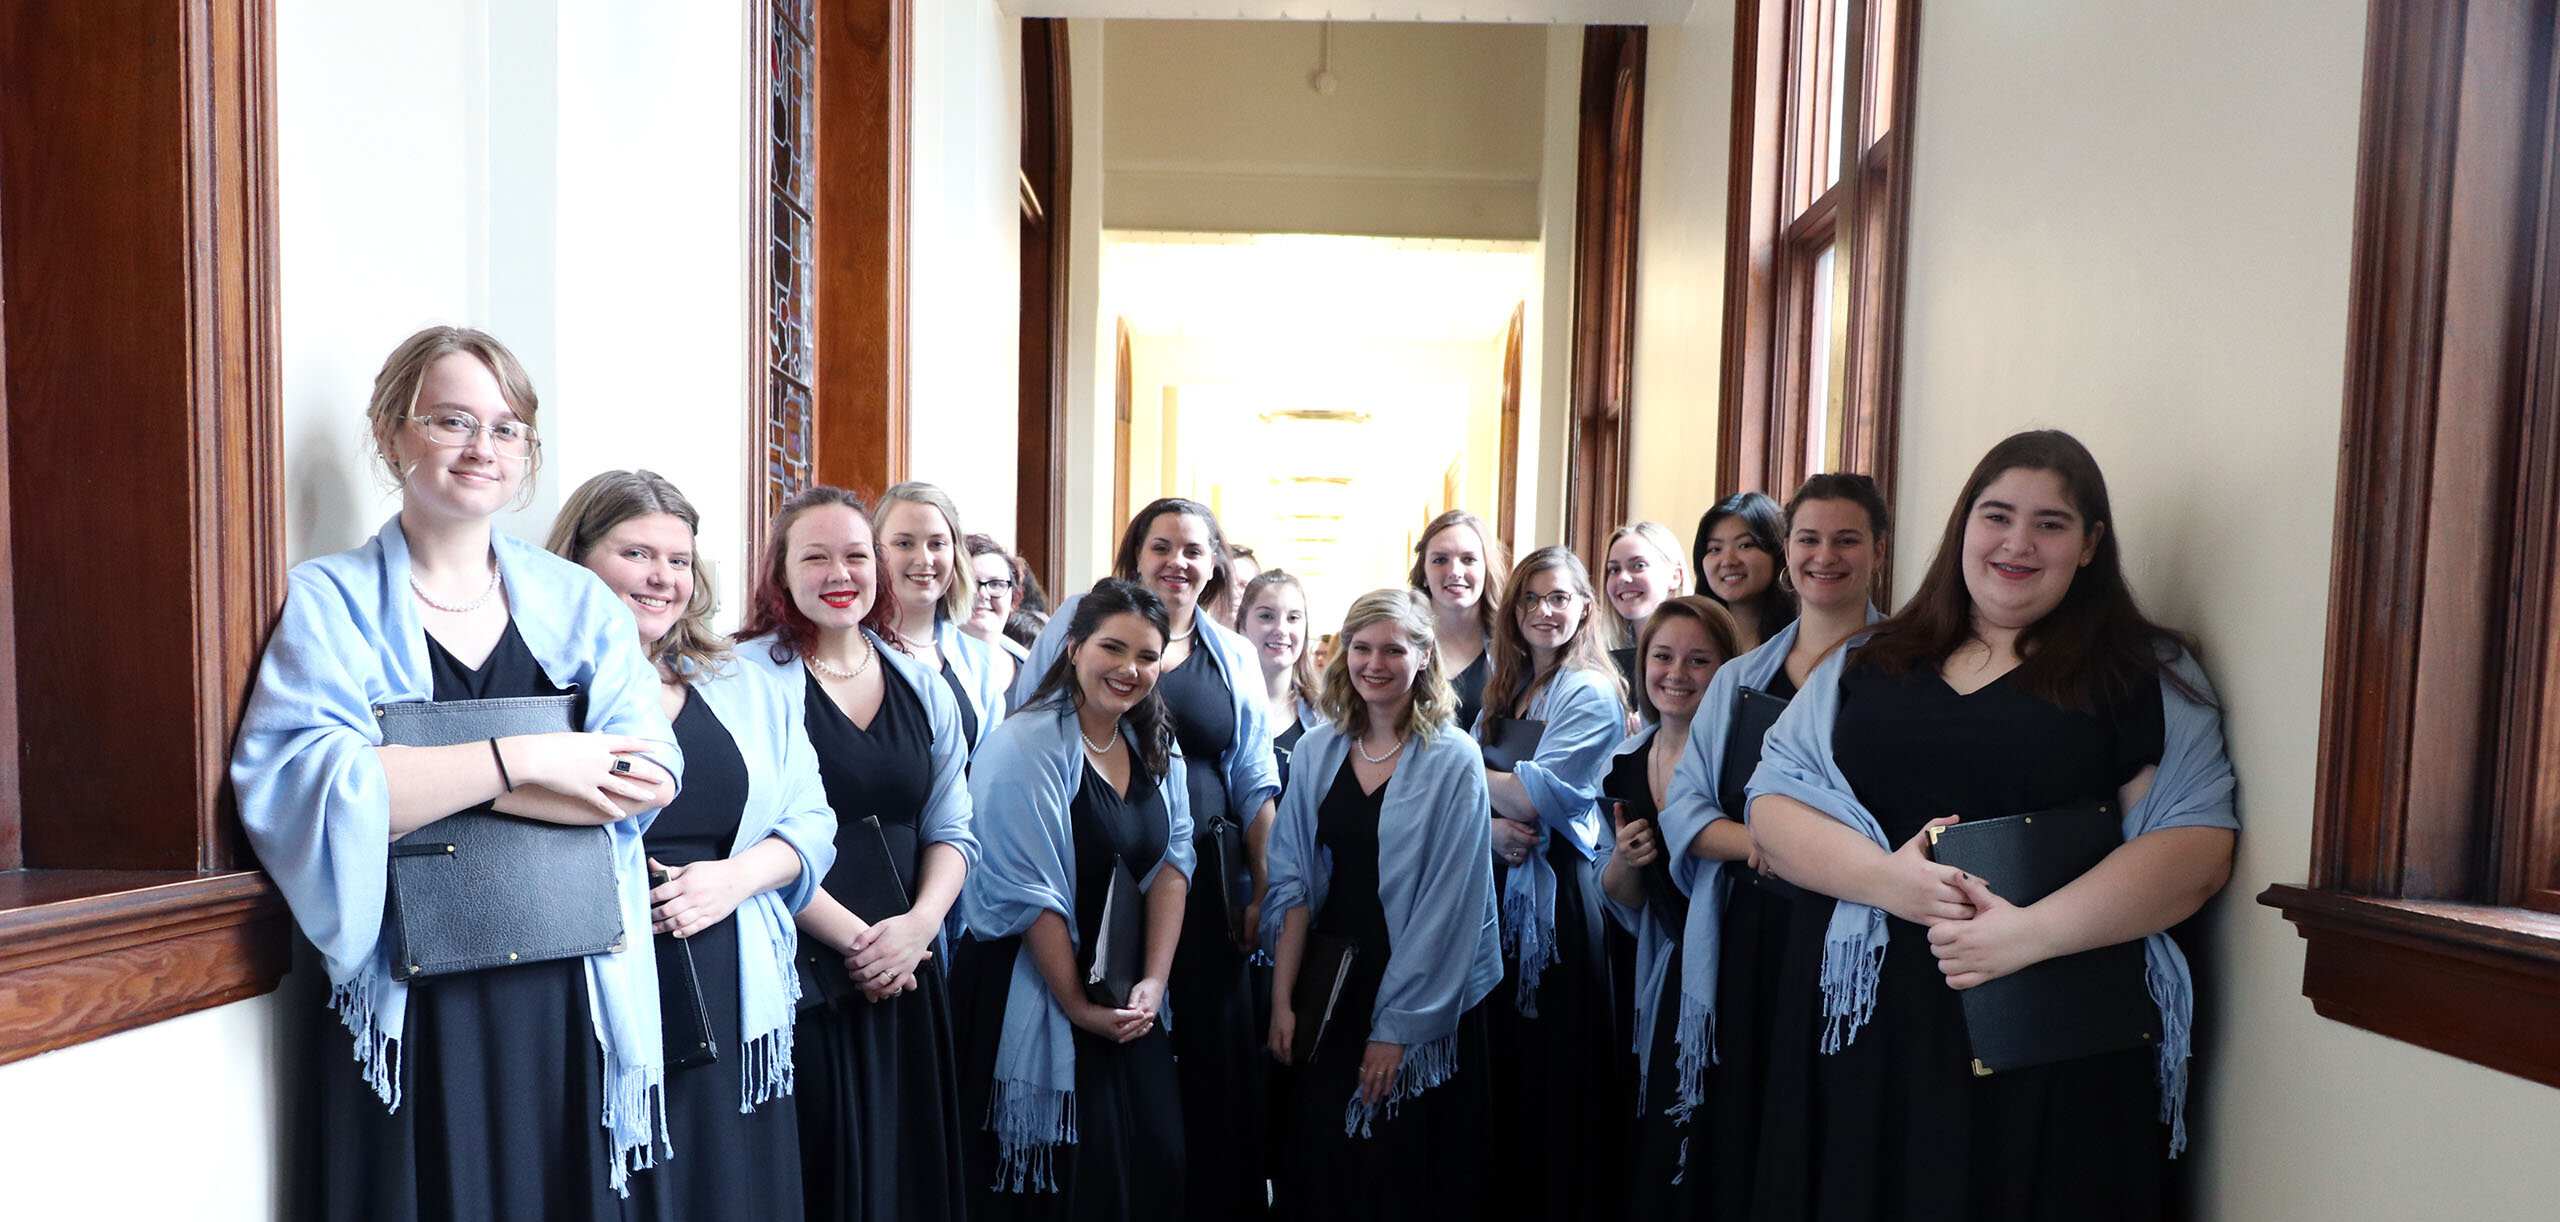 Choir students smile for a group picture before a concert